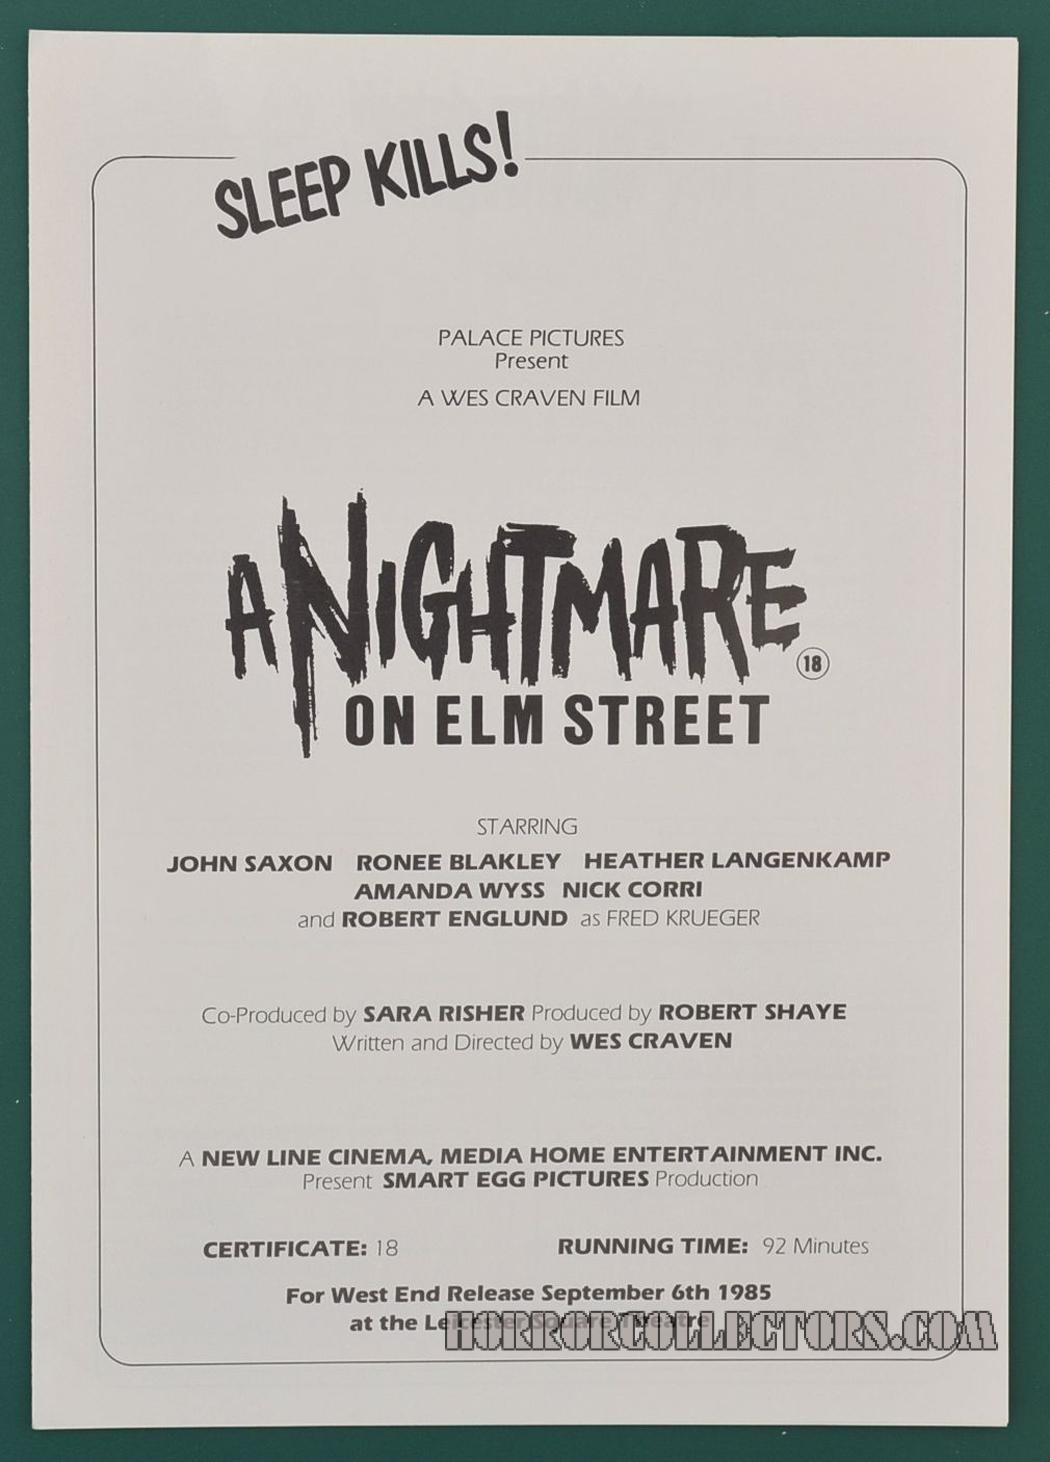 A Nightmare on Elm Street UK Palace Pictures press sheet synopsis